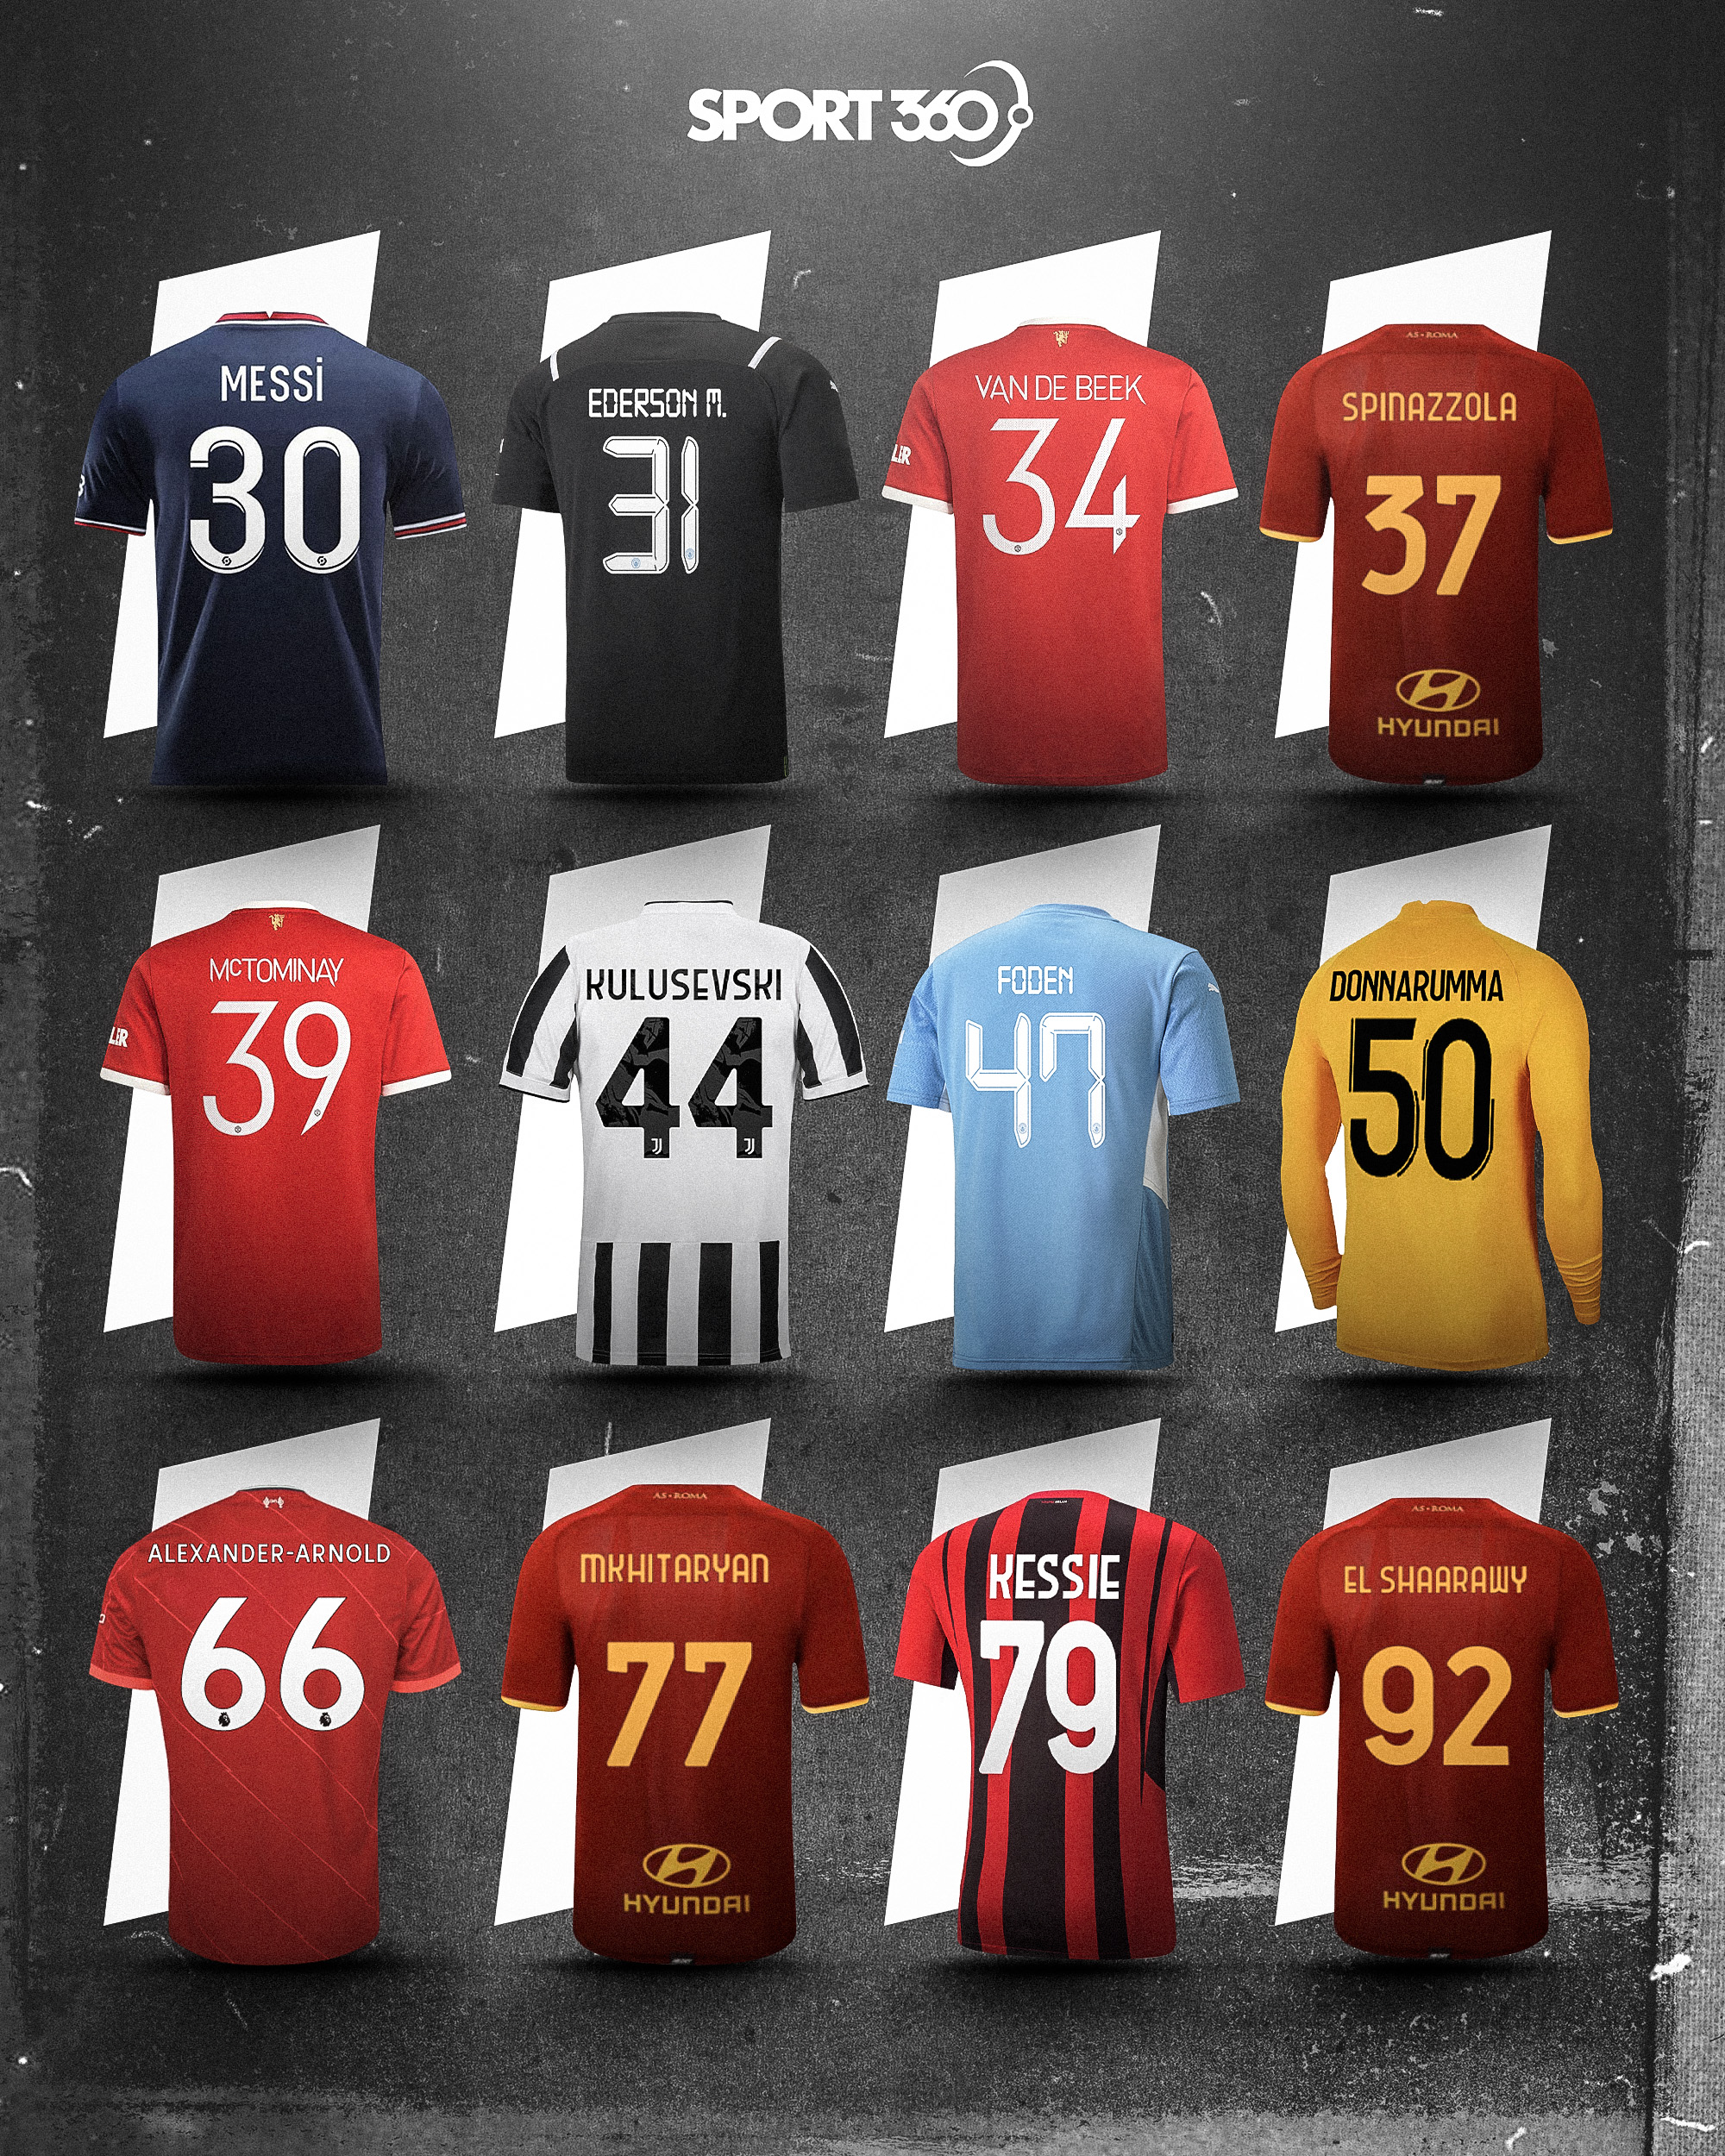 Sport360 - The best players occupying shirt numbers